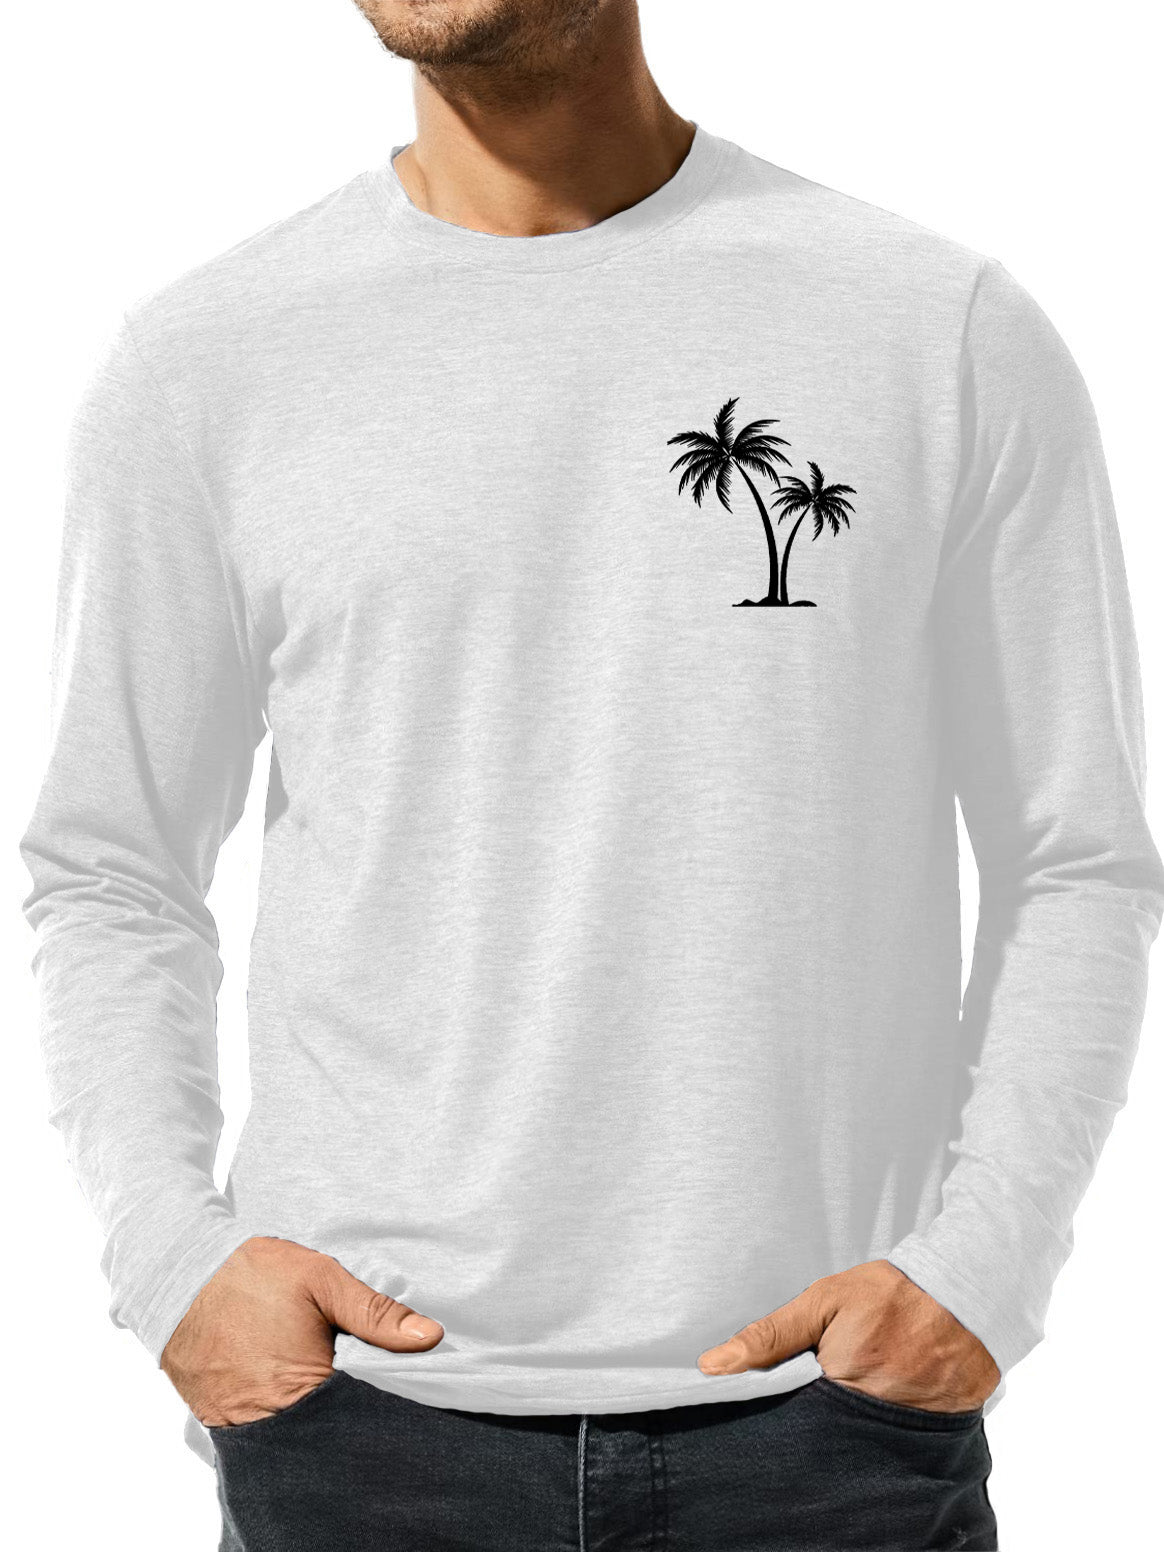 Men's Solid Color Coconut Palm Tree Printed Casual Long Sleeve T-Shirt